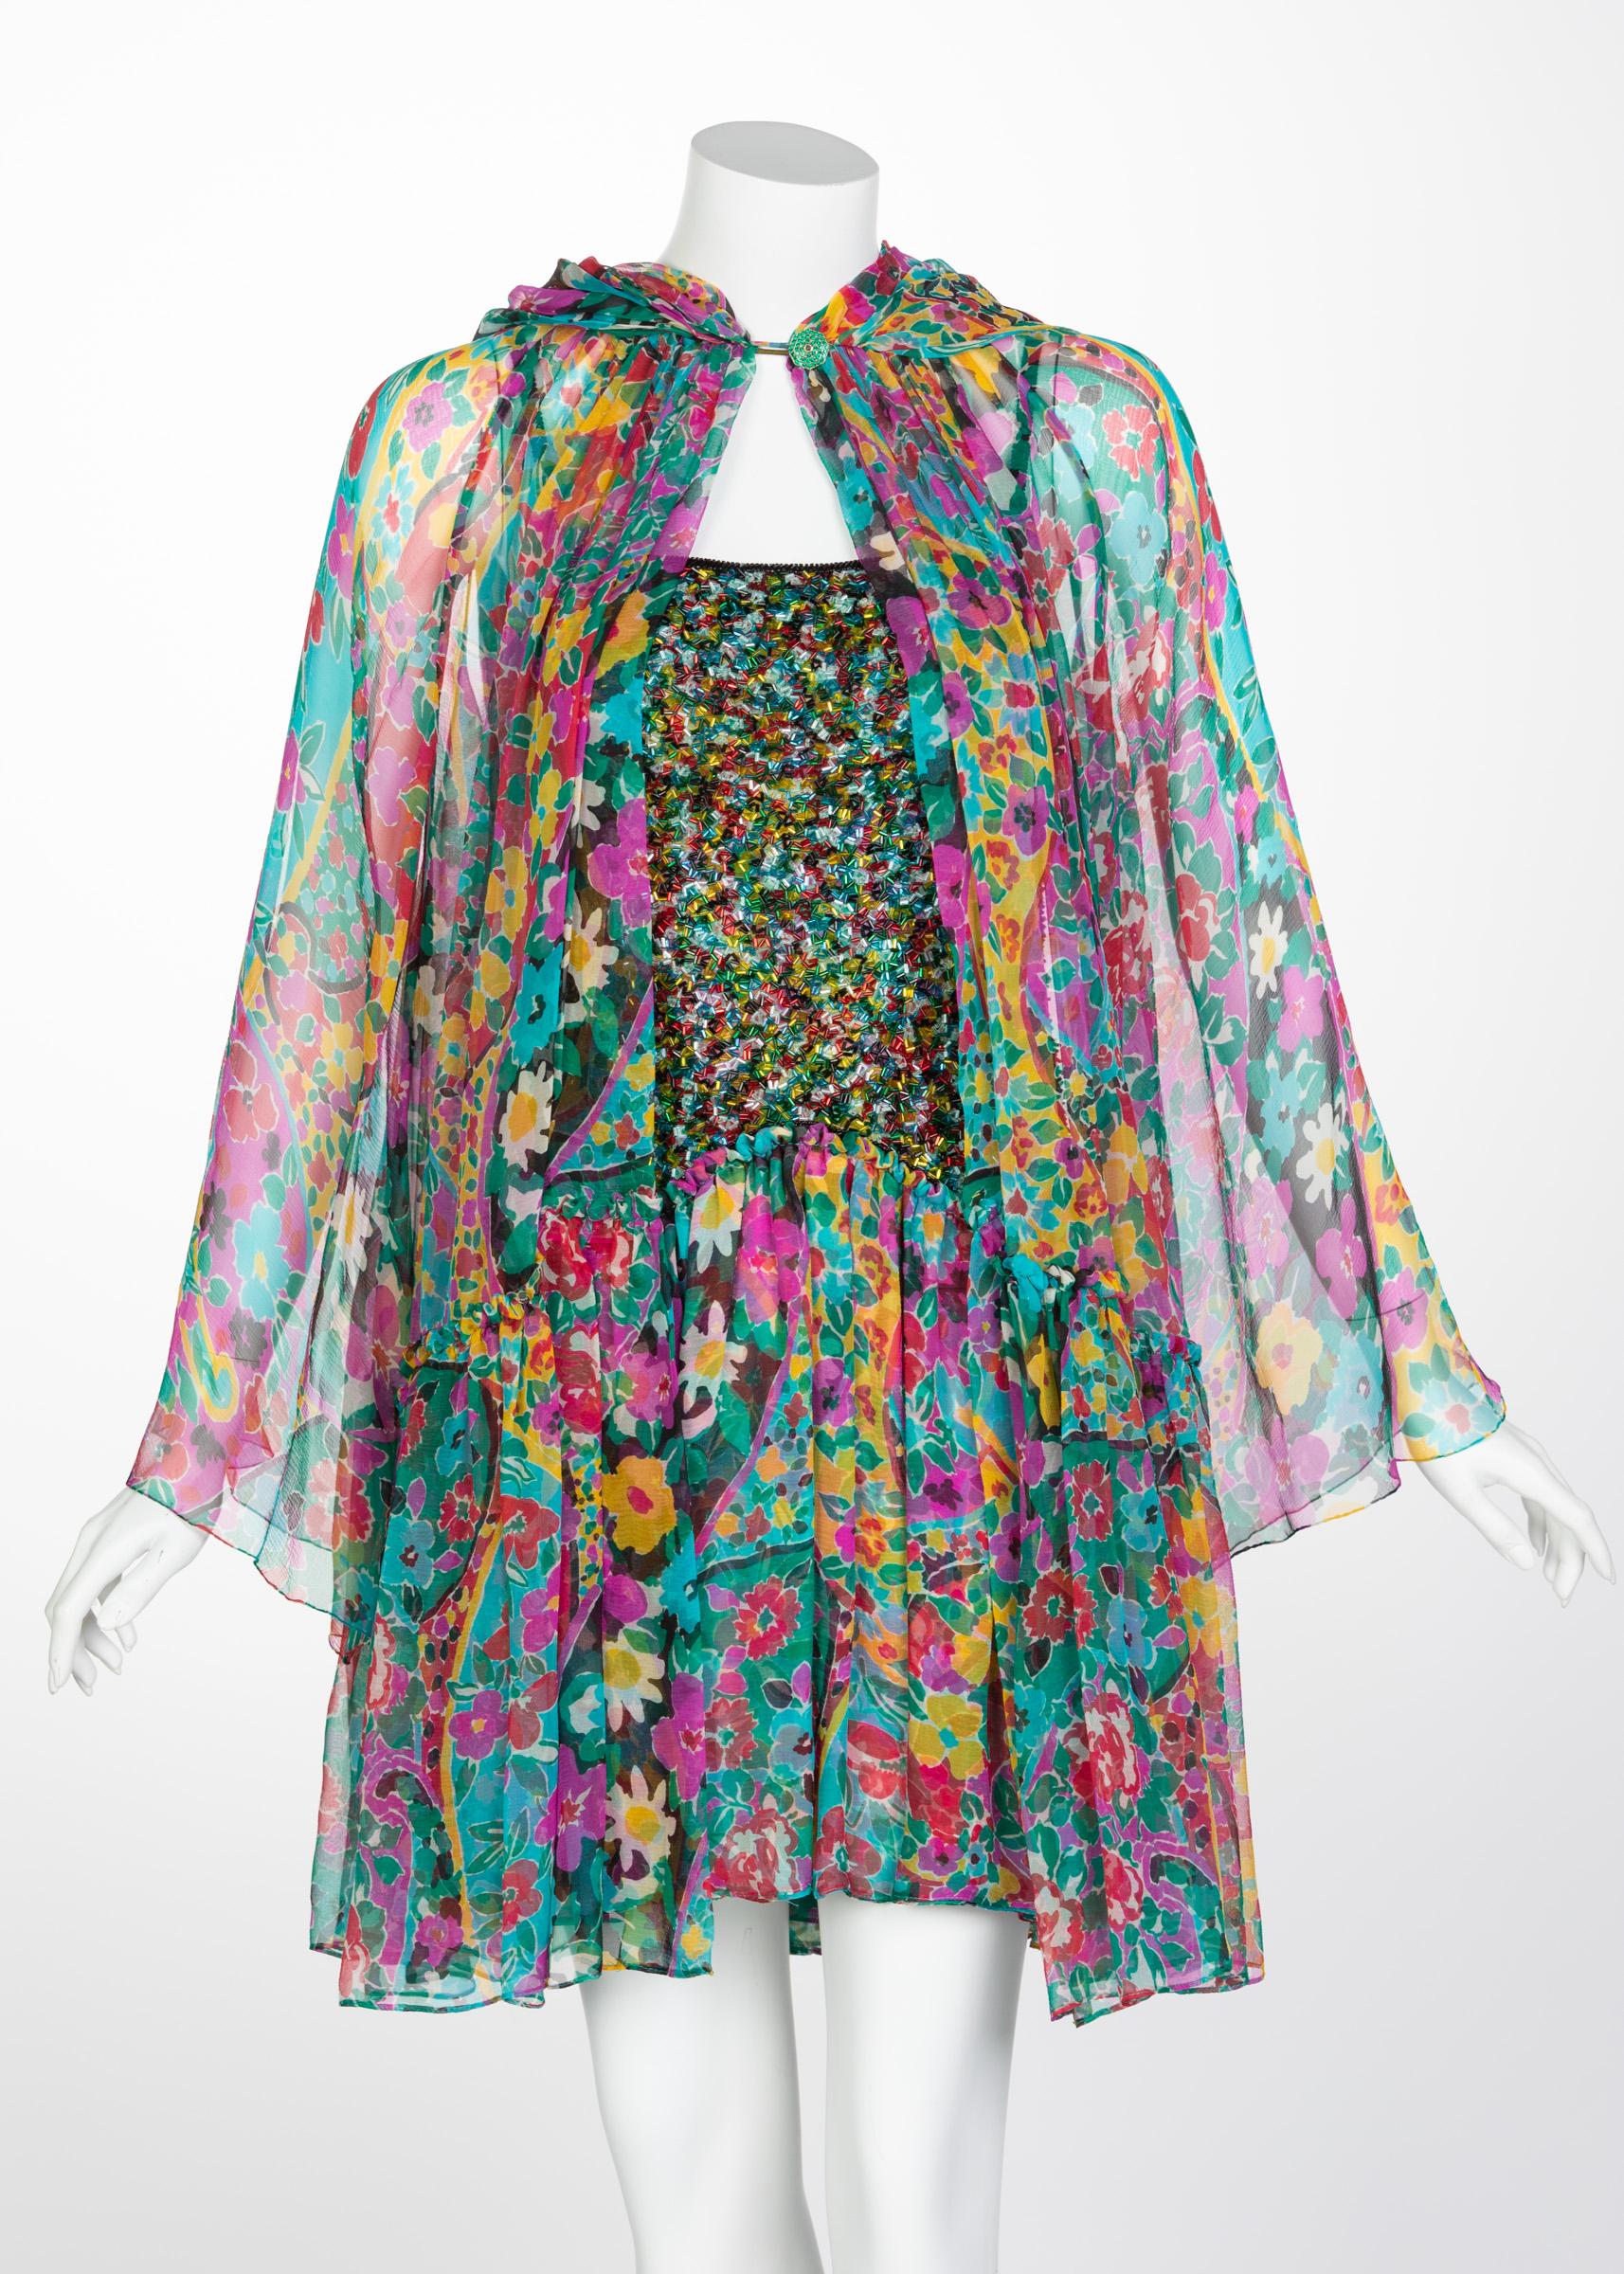 Gray James Galanos Couture Beaded Floral Silk Mini Dress with Hooded Opera Coat, 1970